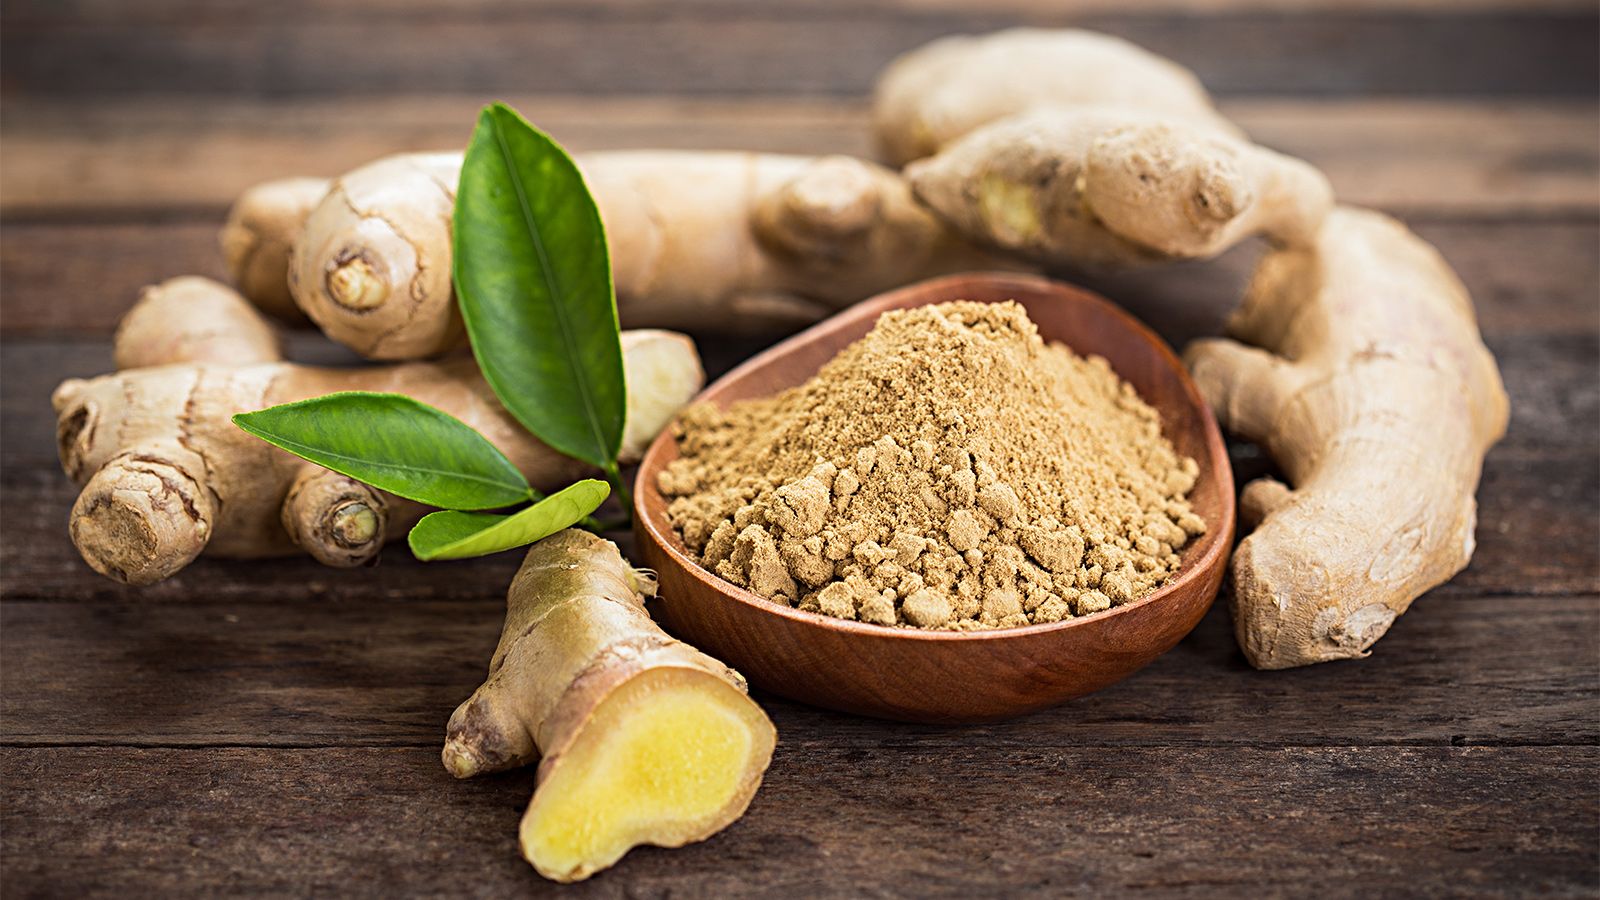 Organic Ginger: A Root with Anti-inflammatory and Anti-cancer Properties